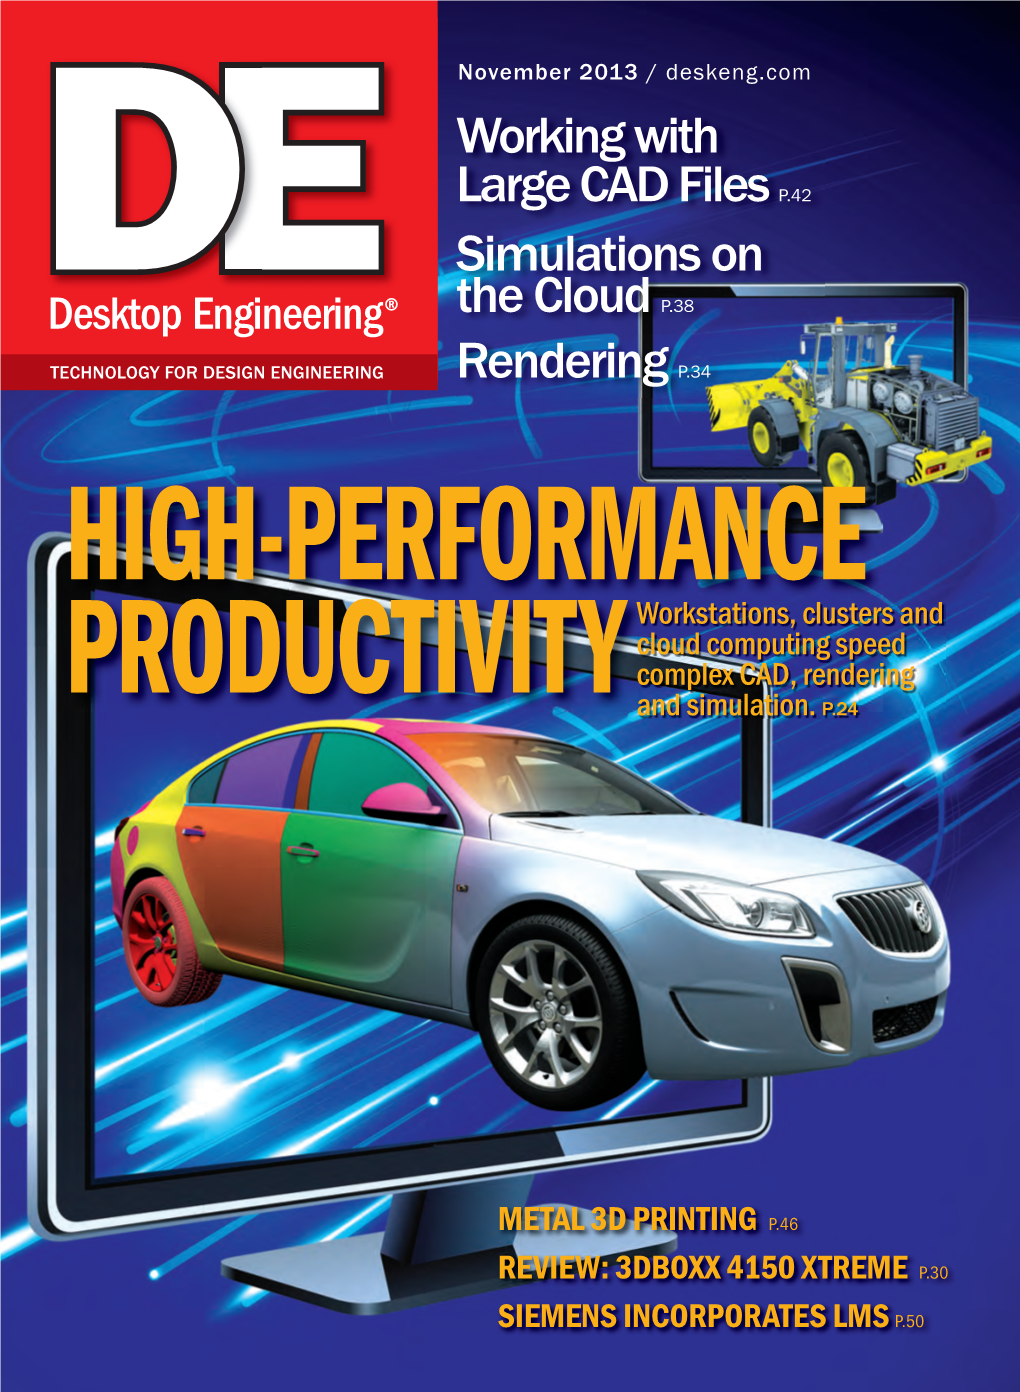 Working with Large CAD Files P.42 Simulations on the Cloud P.38